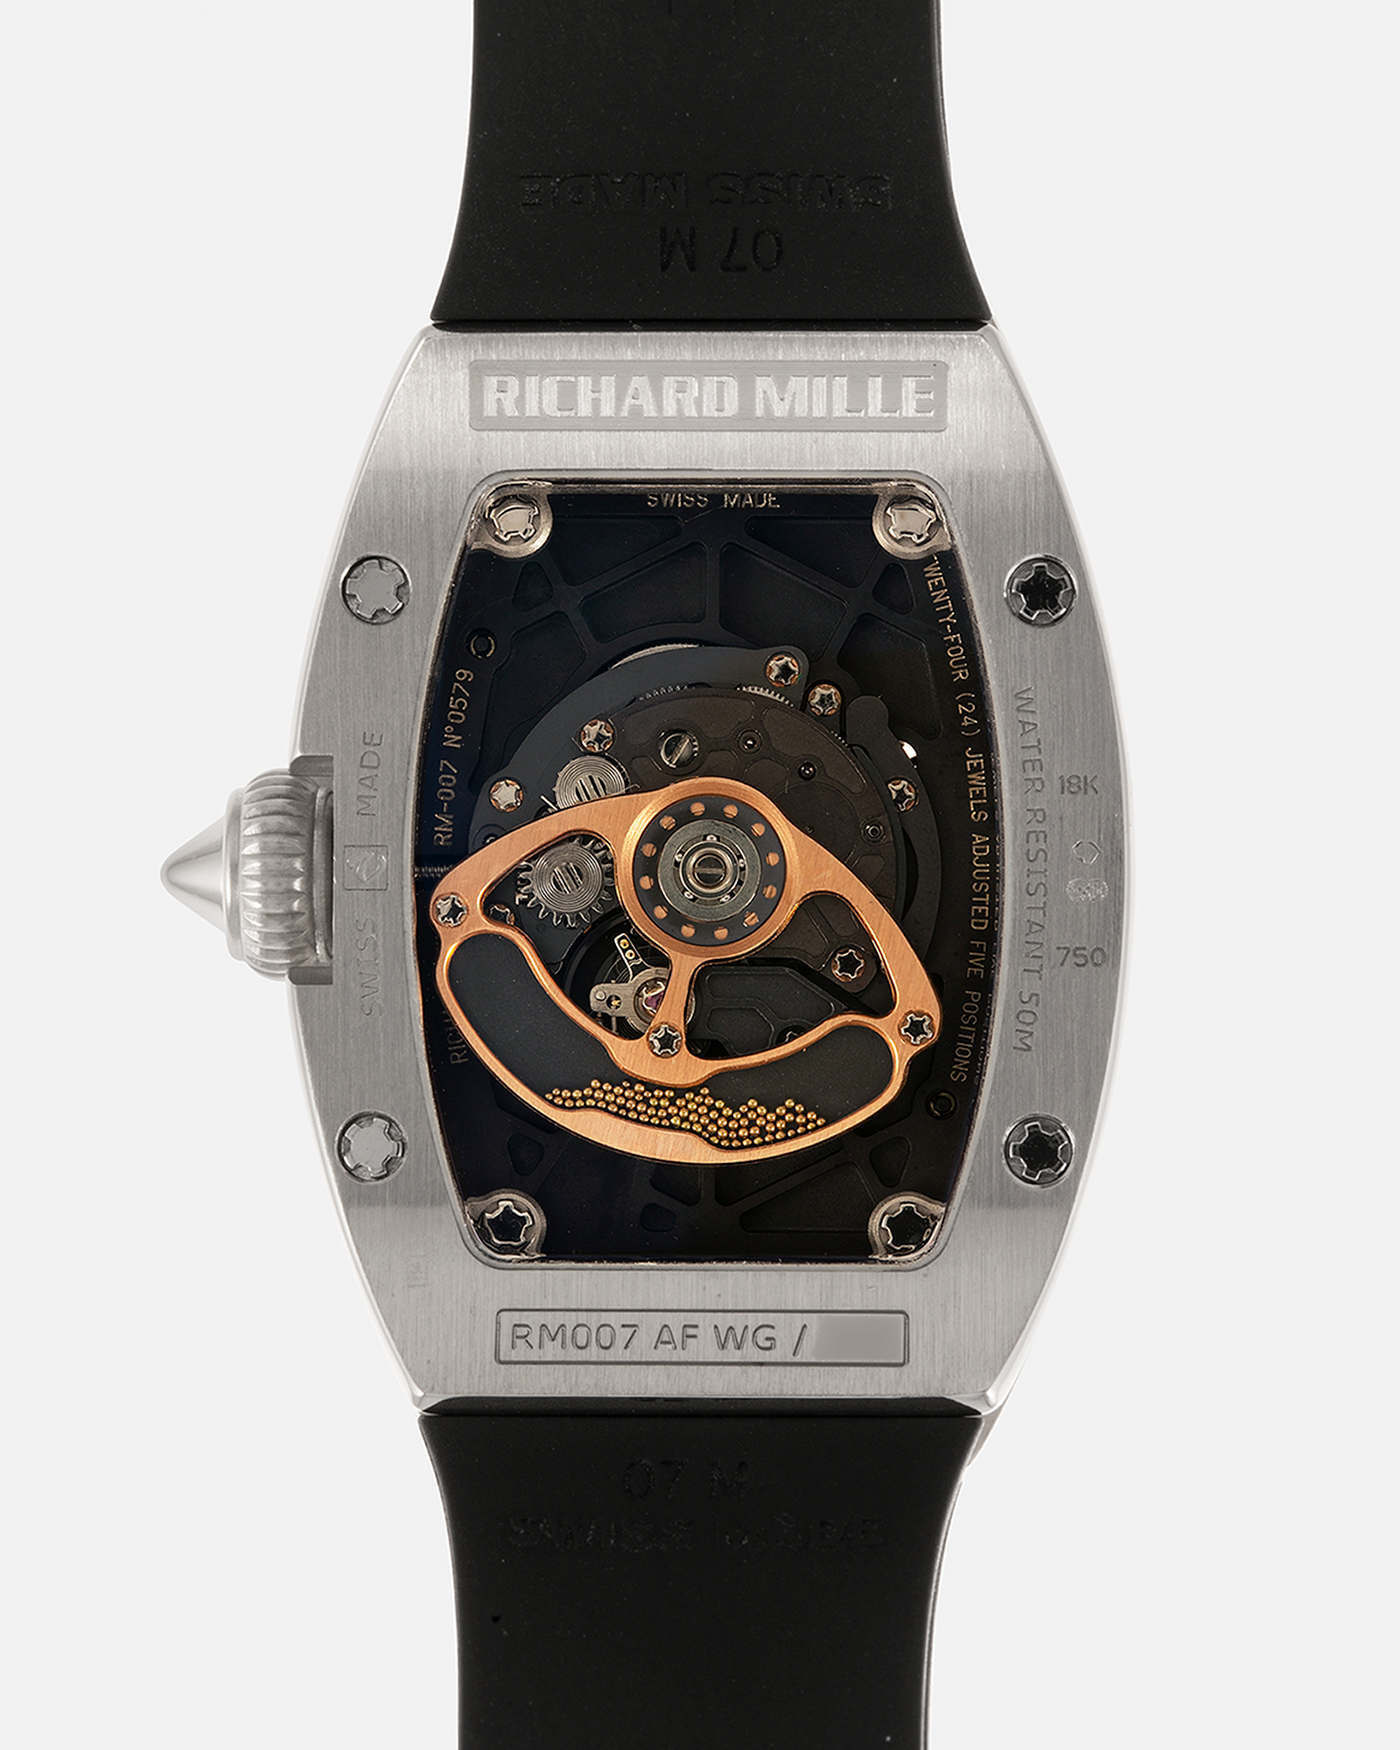 Brand: Richard Mille Year: 2000s Model: RM007 ‘Orange Lip’ Case Material: 18-carat White Gold Case, Diamond-Set Hour Markers Movement: Richard Mille Cal. RM007, Self-Winding Case Dimensions: 31mm x 45mm  Strap: Richard Mille Black Rubber Strap with Signed Titanium Deployant Clasp